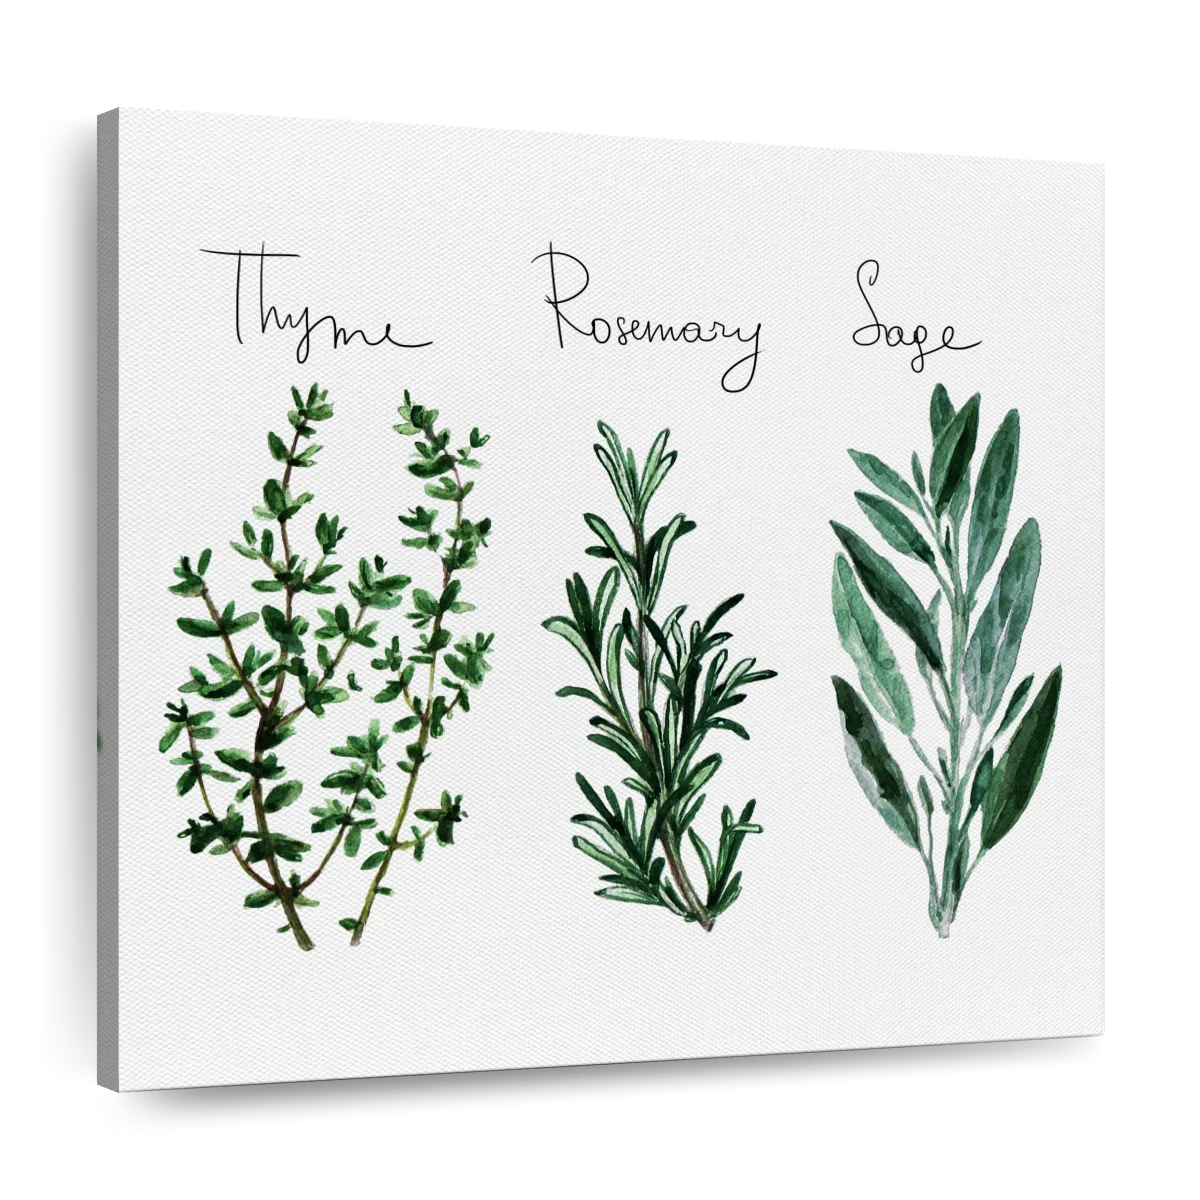 https://cdn.shopify.com/s/files/1/1568/8443/products/8zz_es_qf6_layout_1_square_thyme-rosemary-sage-wall-art.webp?v=1668723179